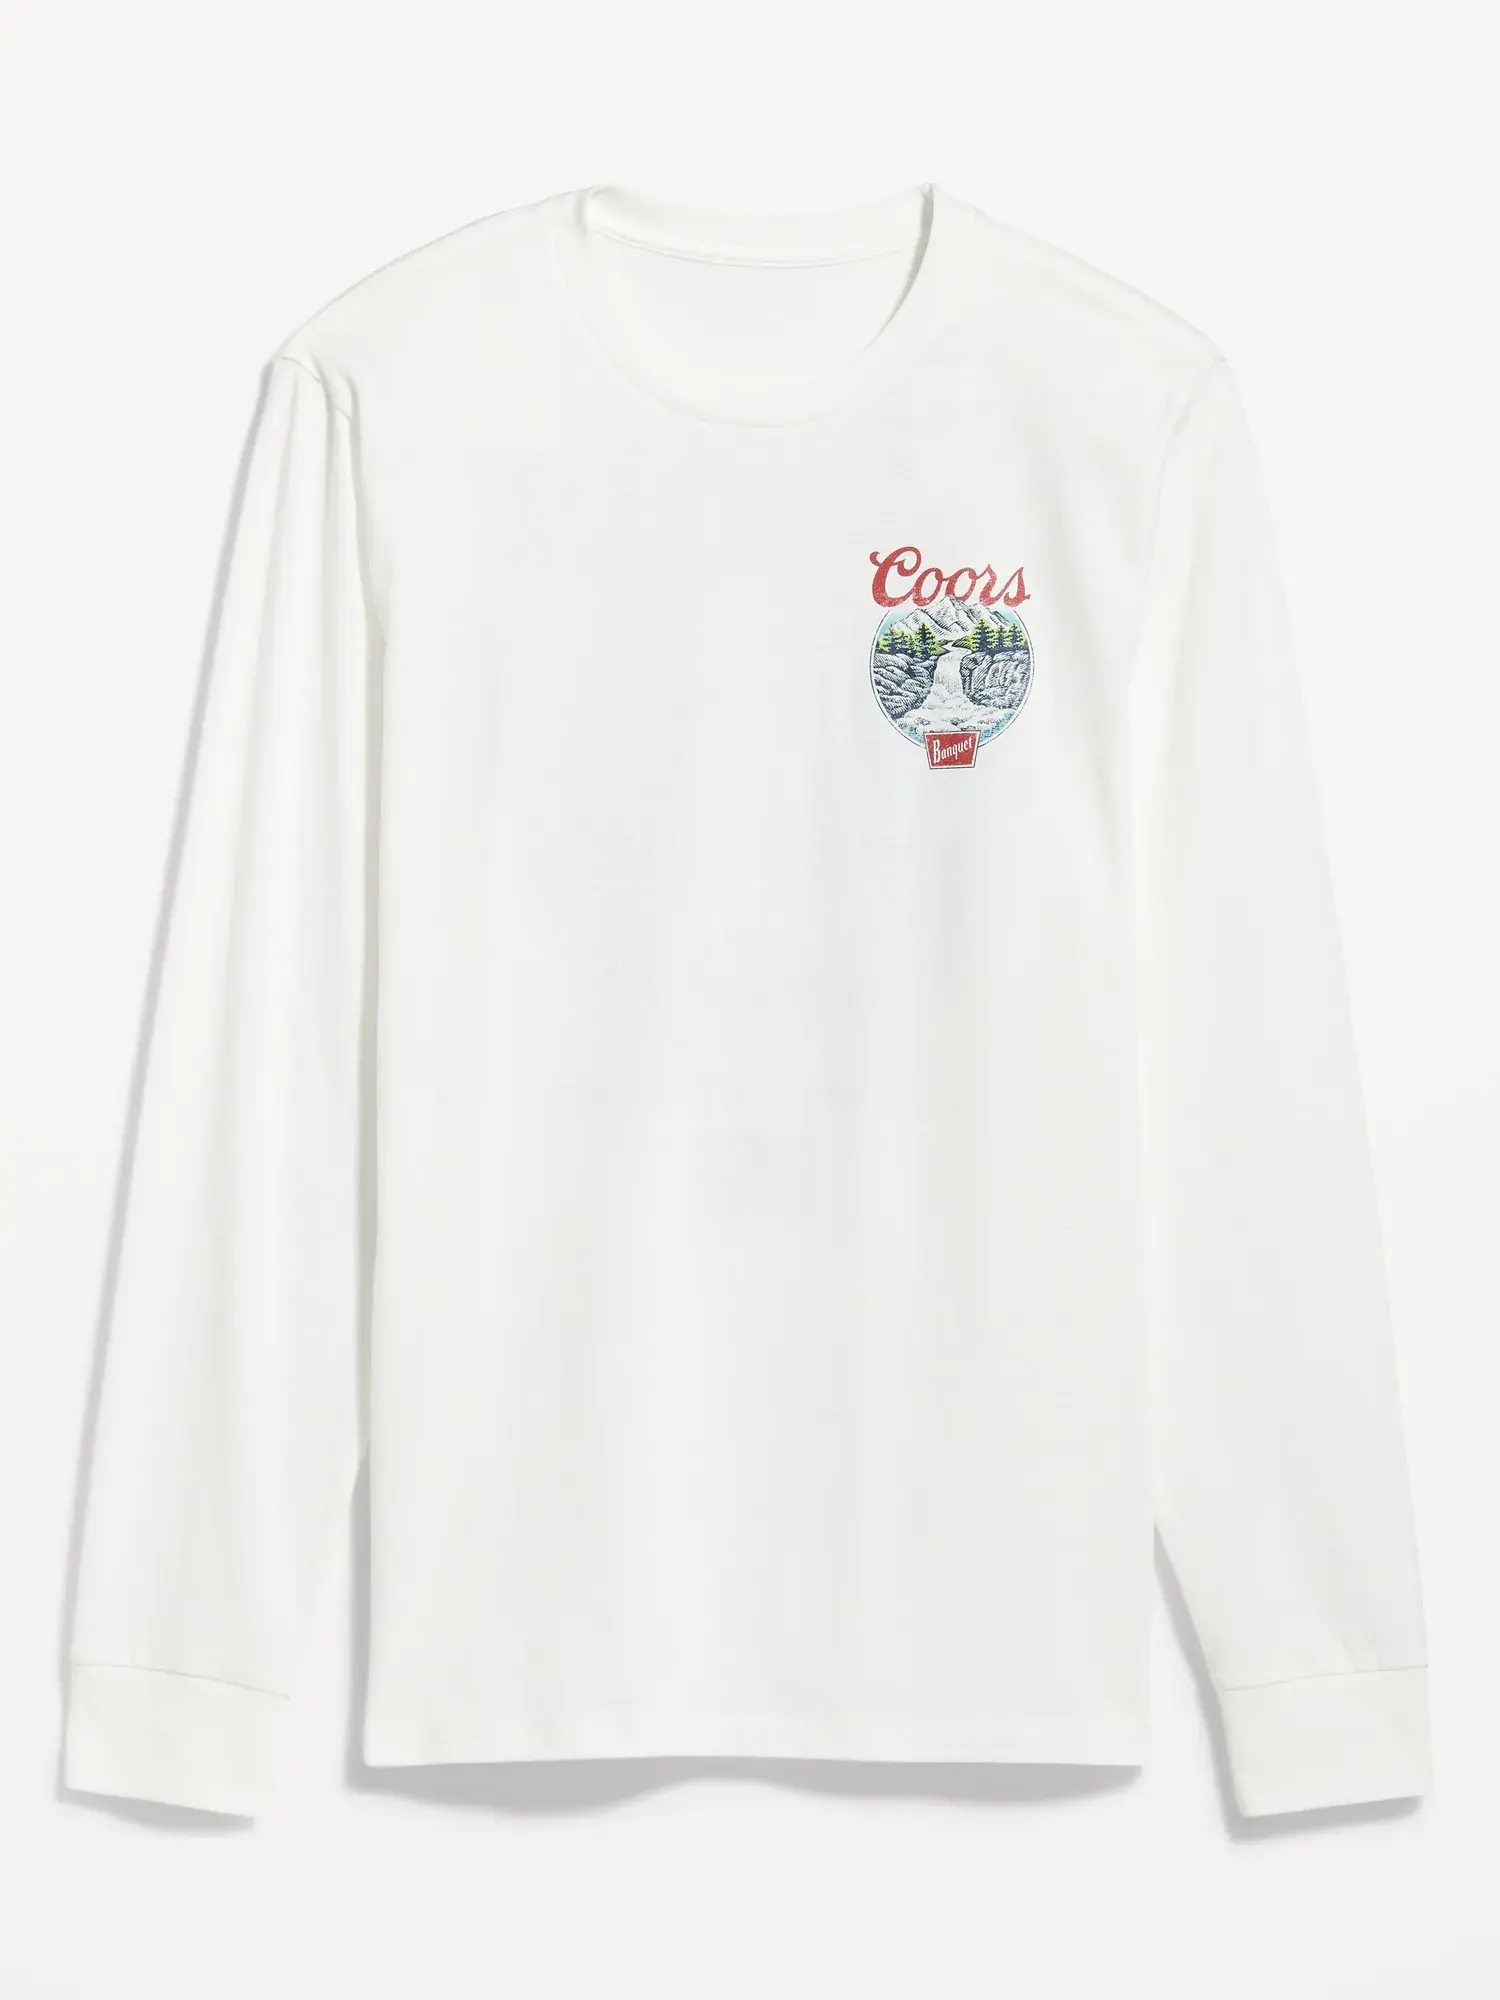 Old Navy Coors Beer© Gender-Neutral Long-Sleeve T-Shirt for Adults white. 1